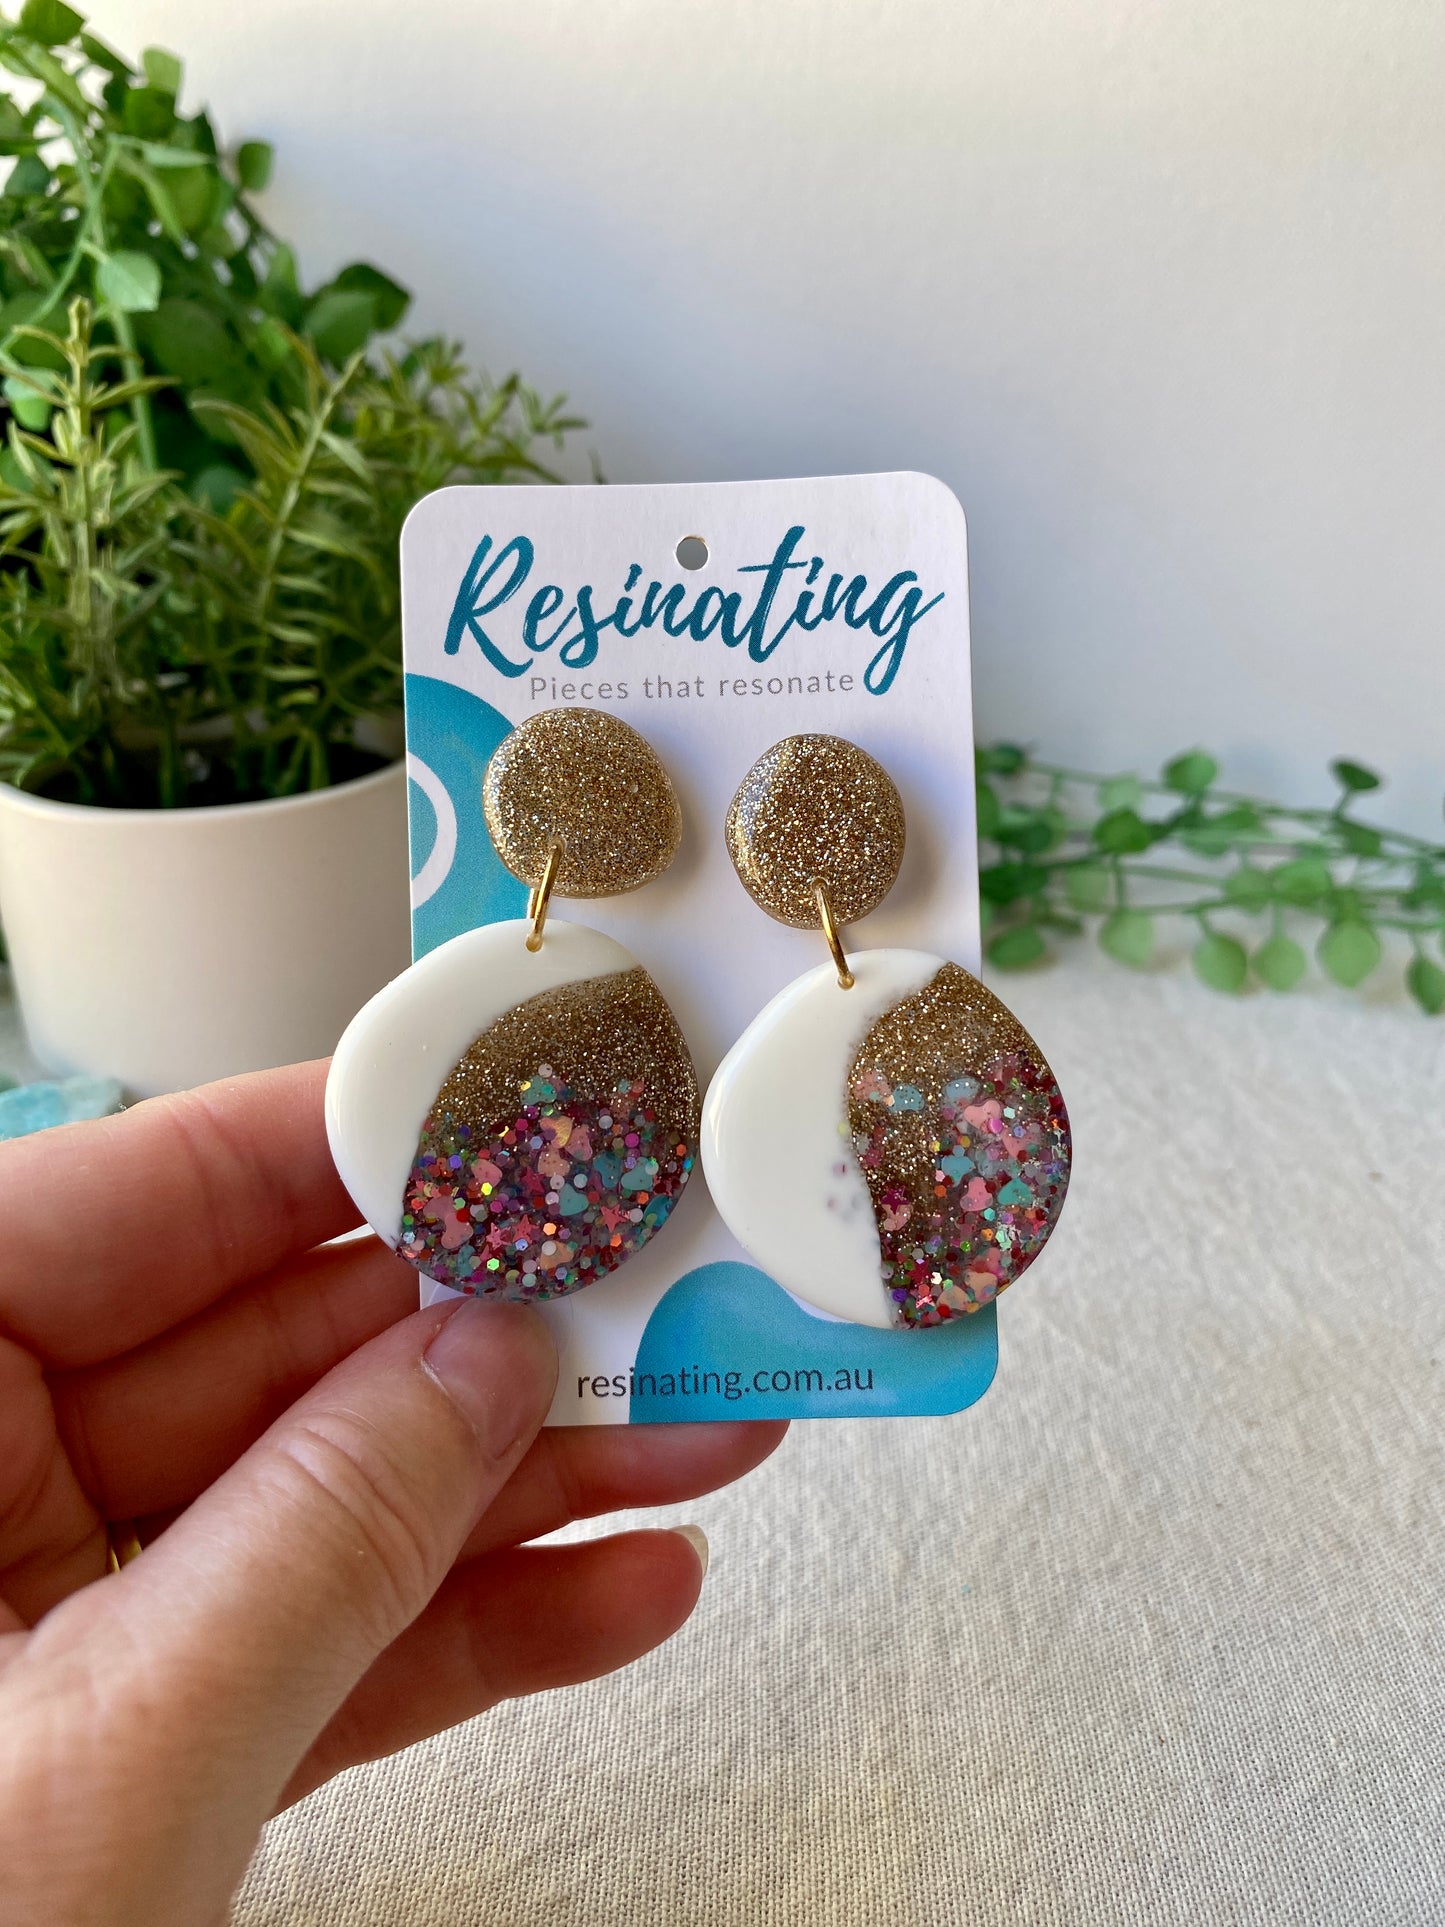 White, gold and glitter dangle earrings - READY TO POST